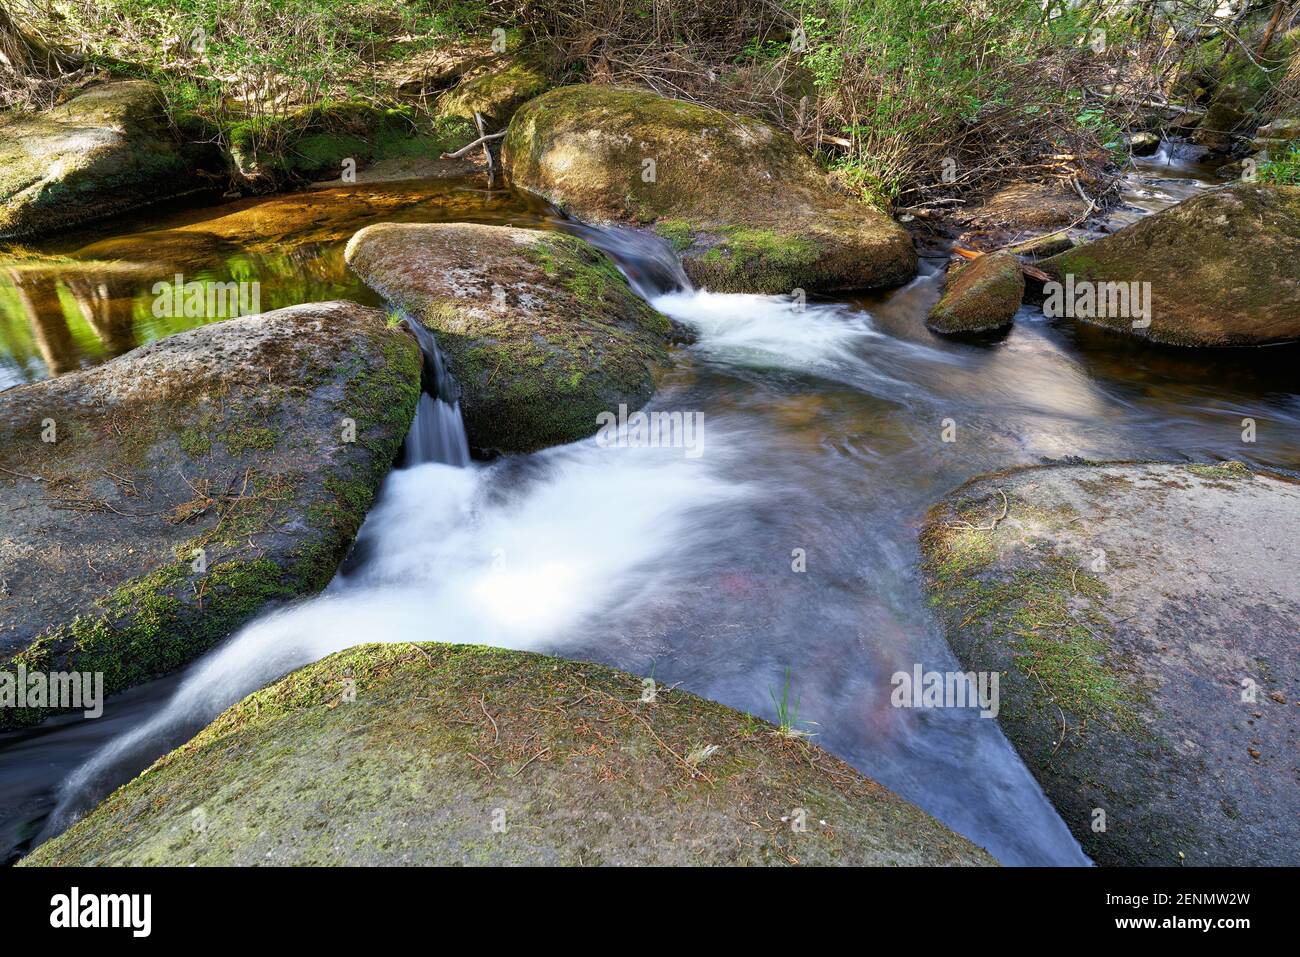 the river kalte Bode in the national park Harz near Schierke in Germany Stock Photo